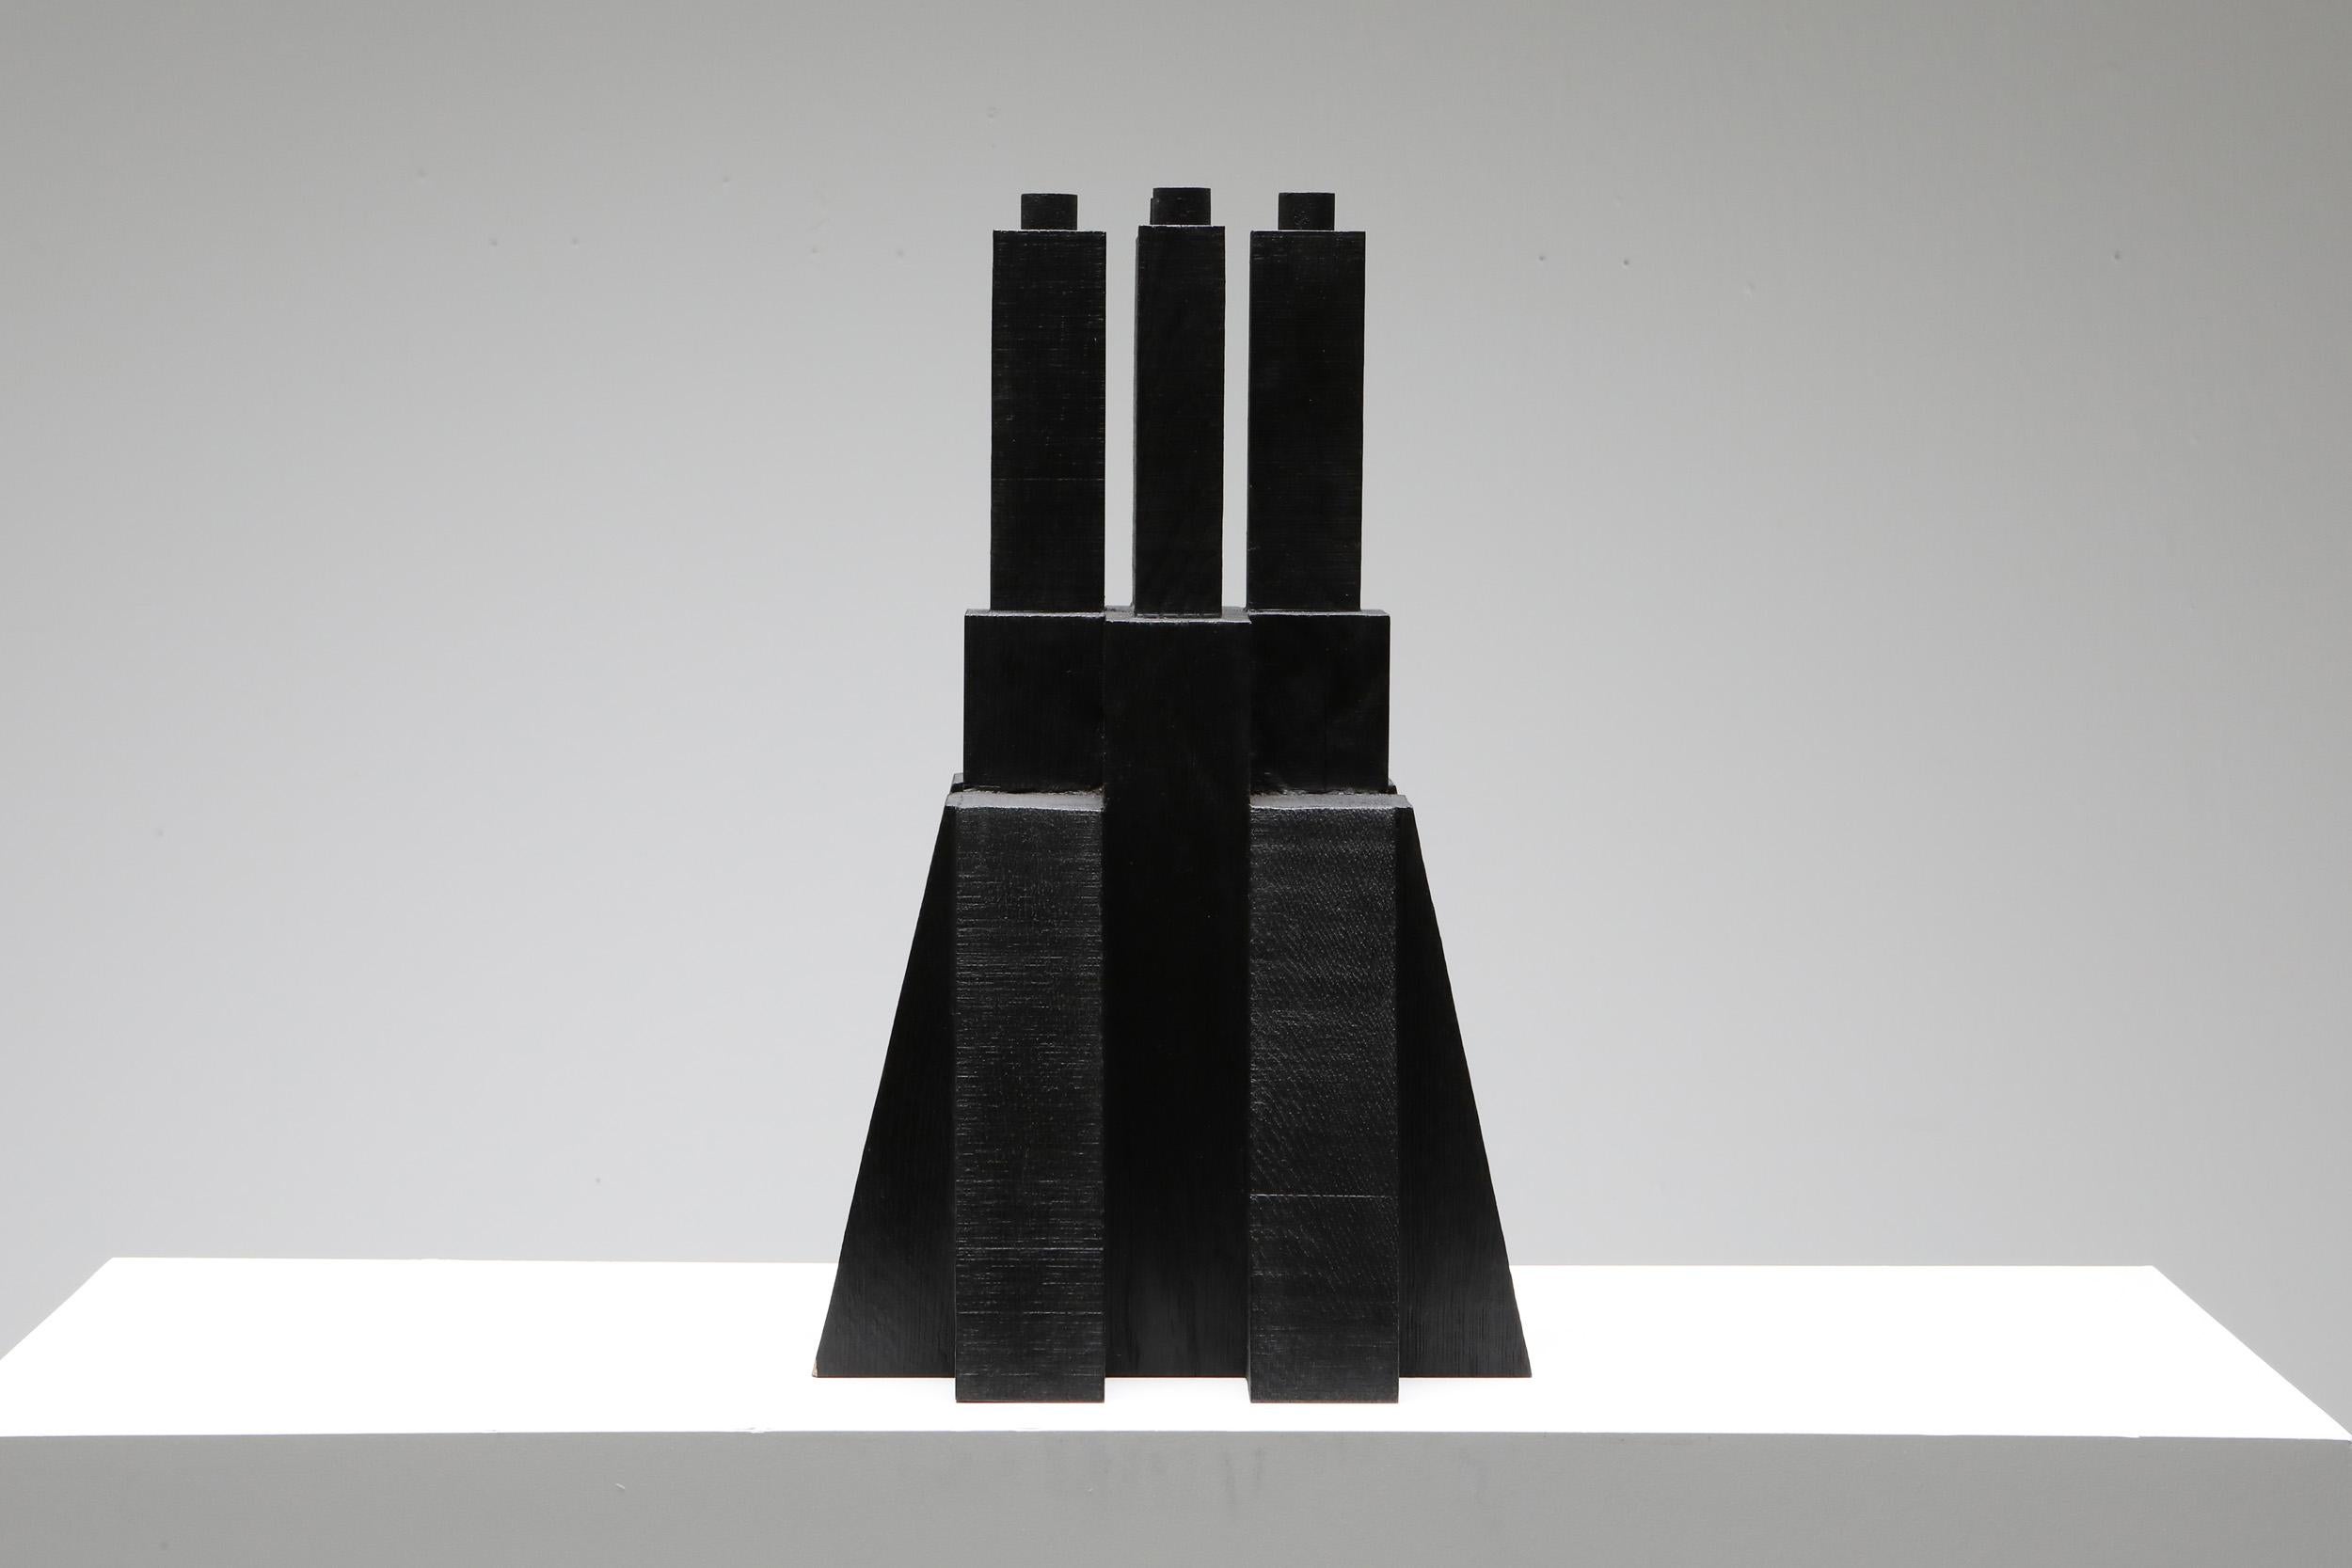 Brutalist, black, burnished, bunker candleholder, Arno Declercq, 2020; Collectible design; Handcrafted

Made in burned and waxed Oak
Measures: 32 cm wide x 32 cm long x 50 cm high / 12.6” wide x 12.6” long x 20” high
Fits well in an African